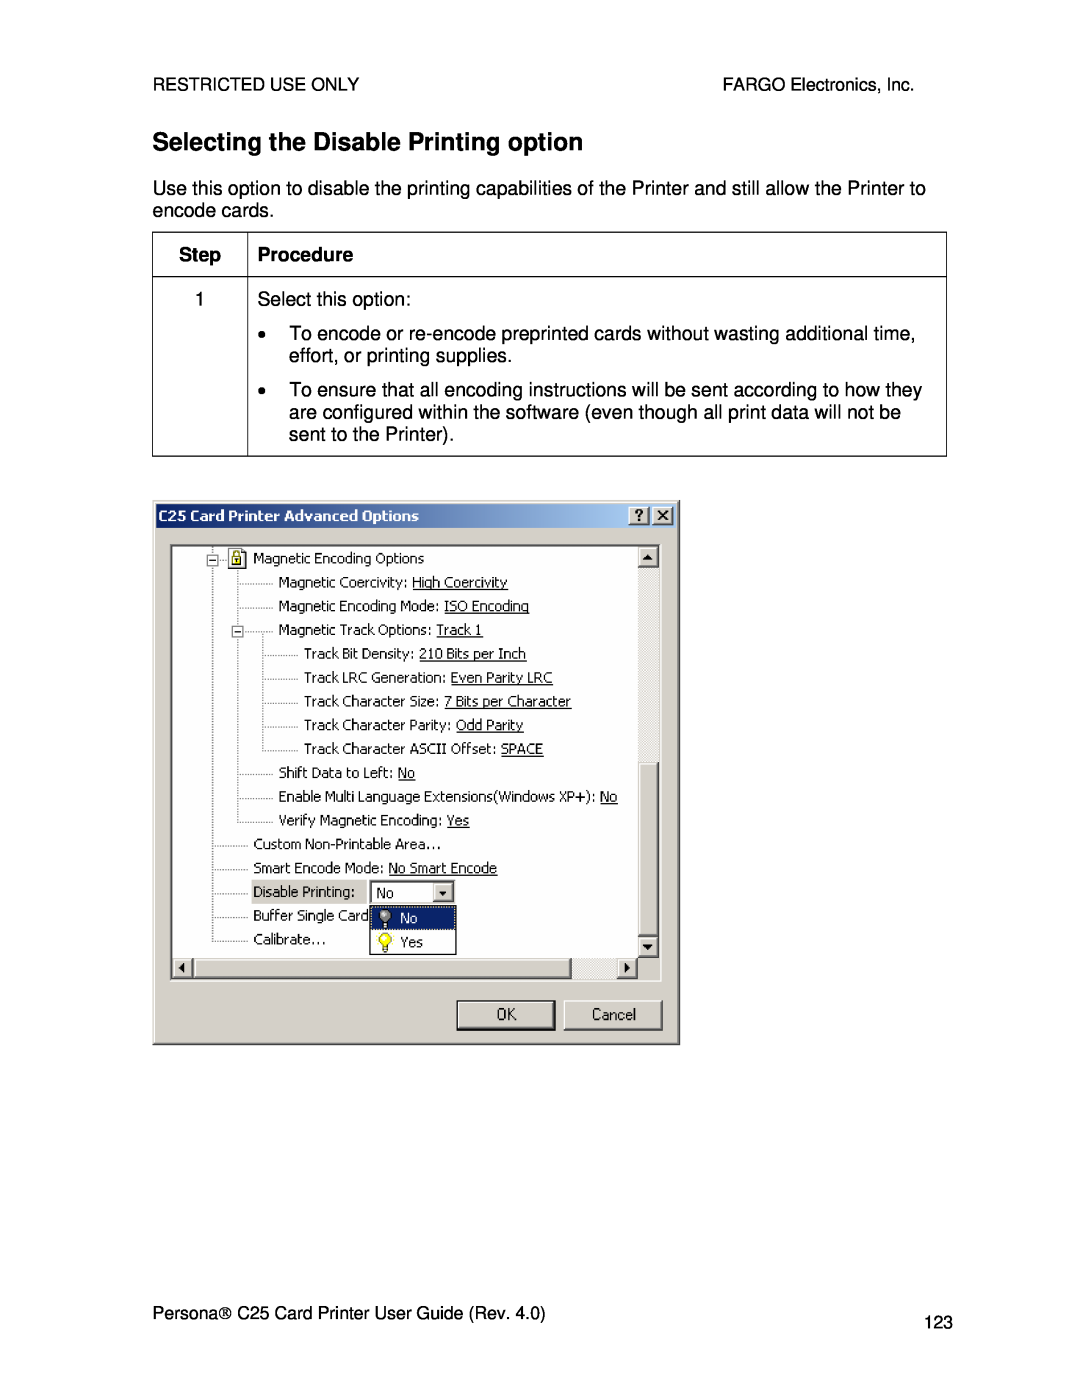 FARGO electronic S000256 manual Selecting the Disable Printing option 